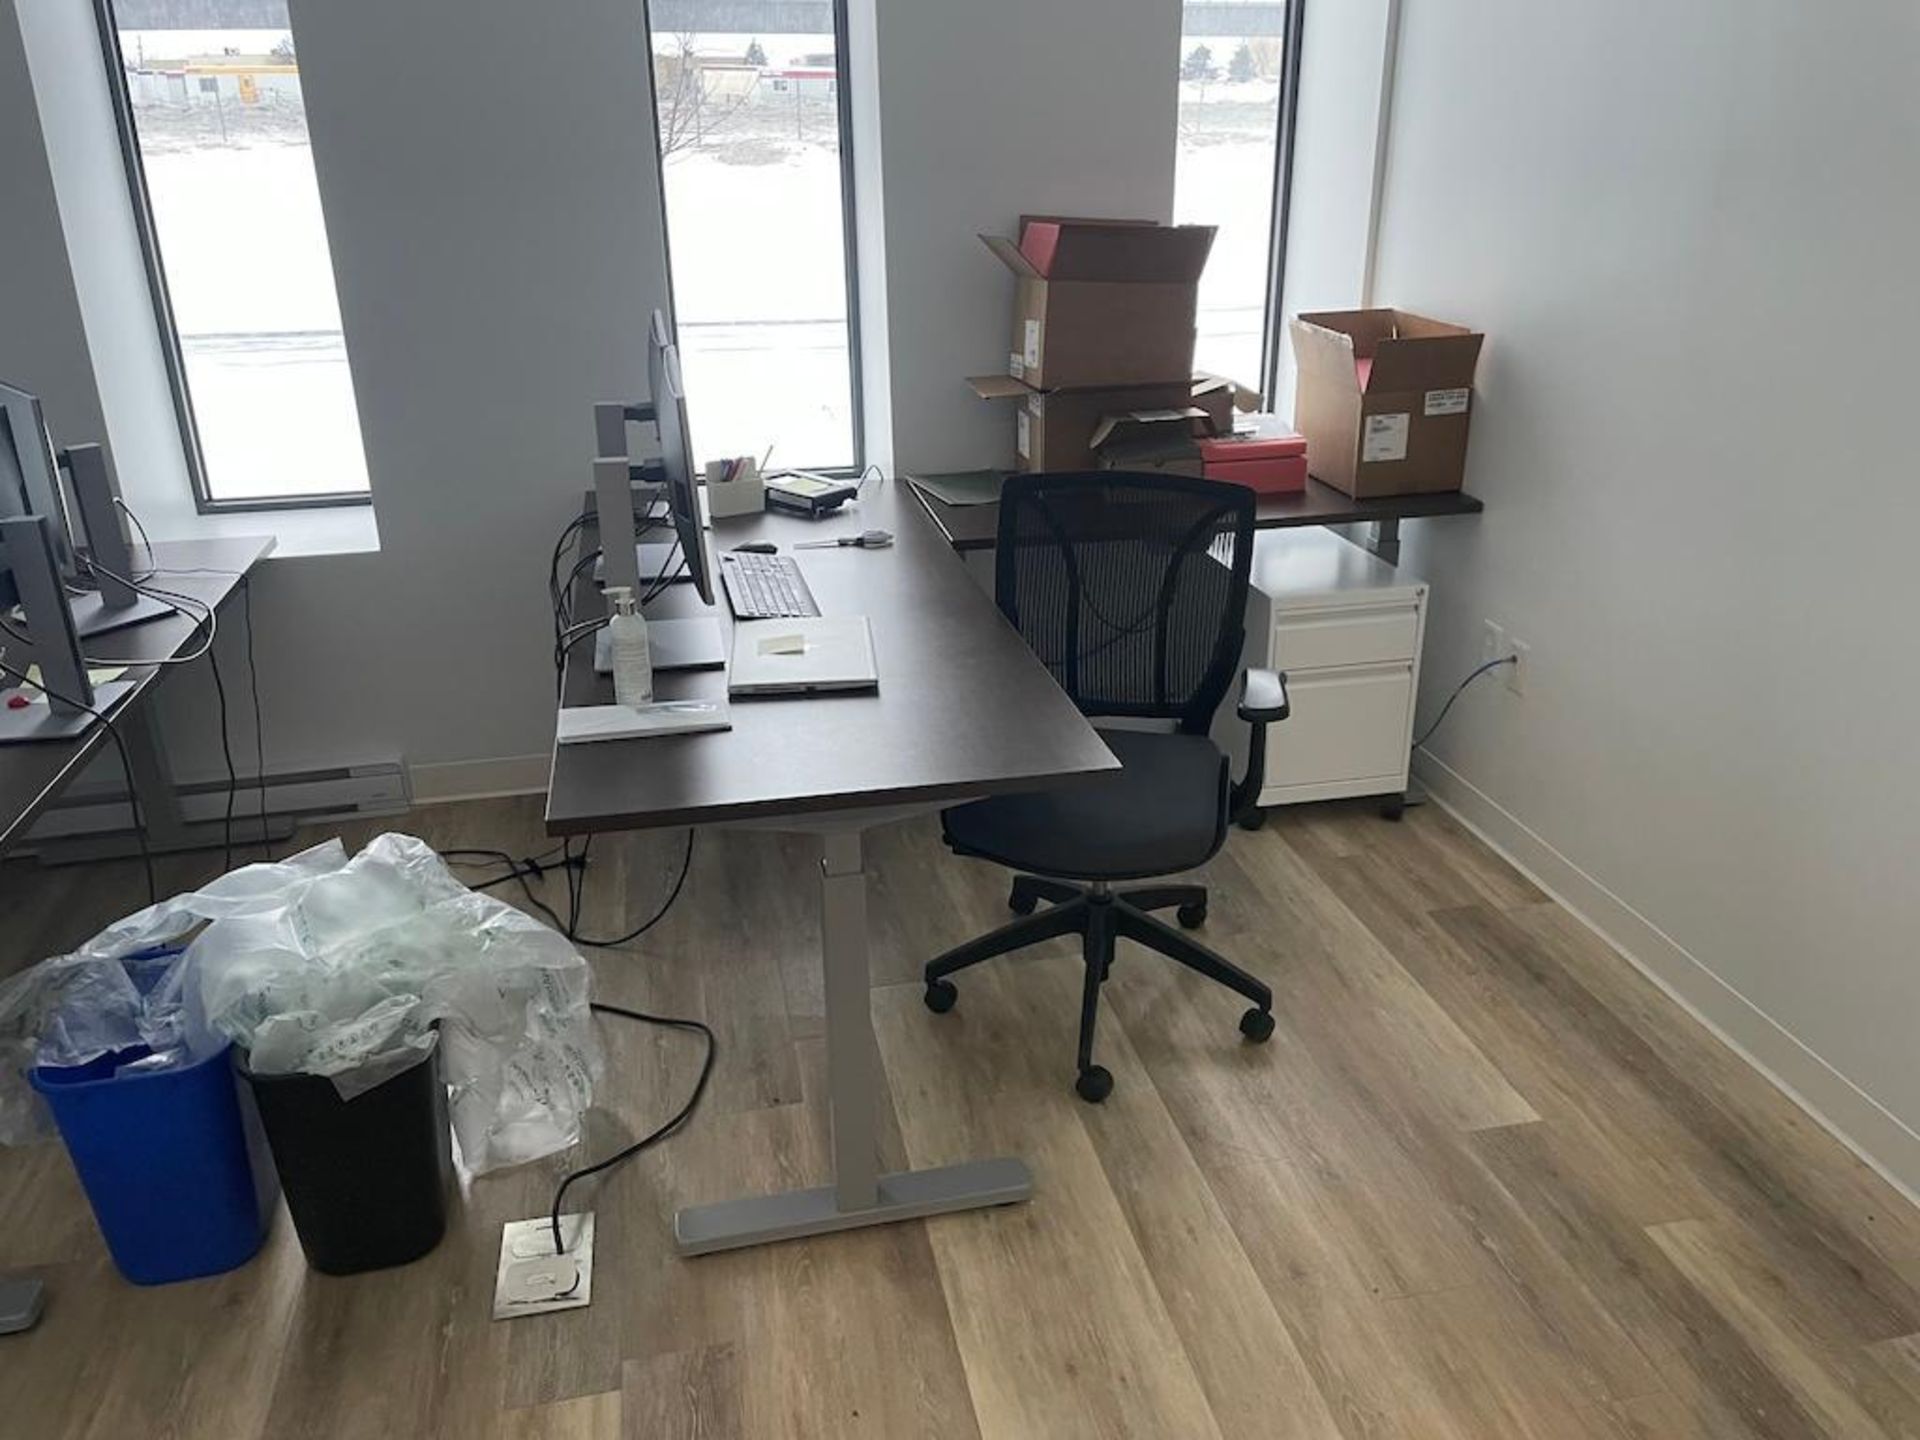 LOT OFFICE FURNITURE 2 L SHAPED DESKS, 2 SWIVEL ARM CHAIRS [1ST FL HR OFFICE] - Image 2 of 2